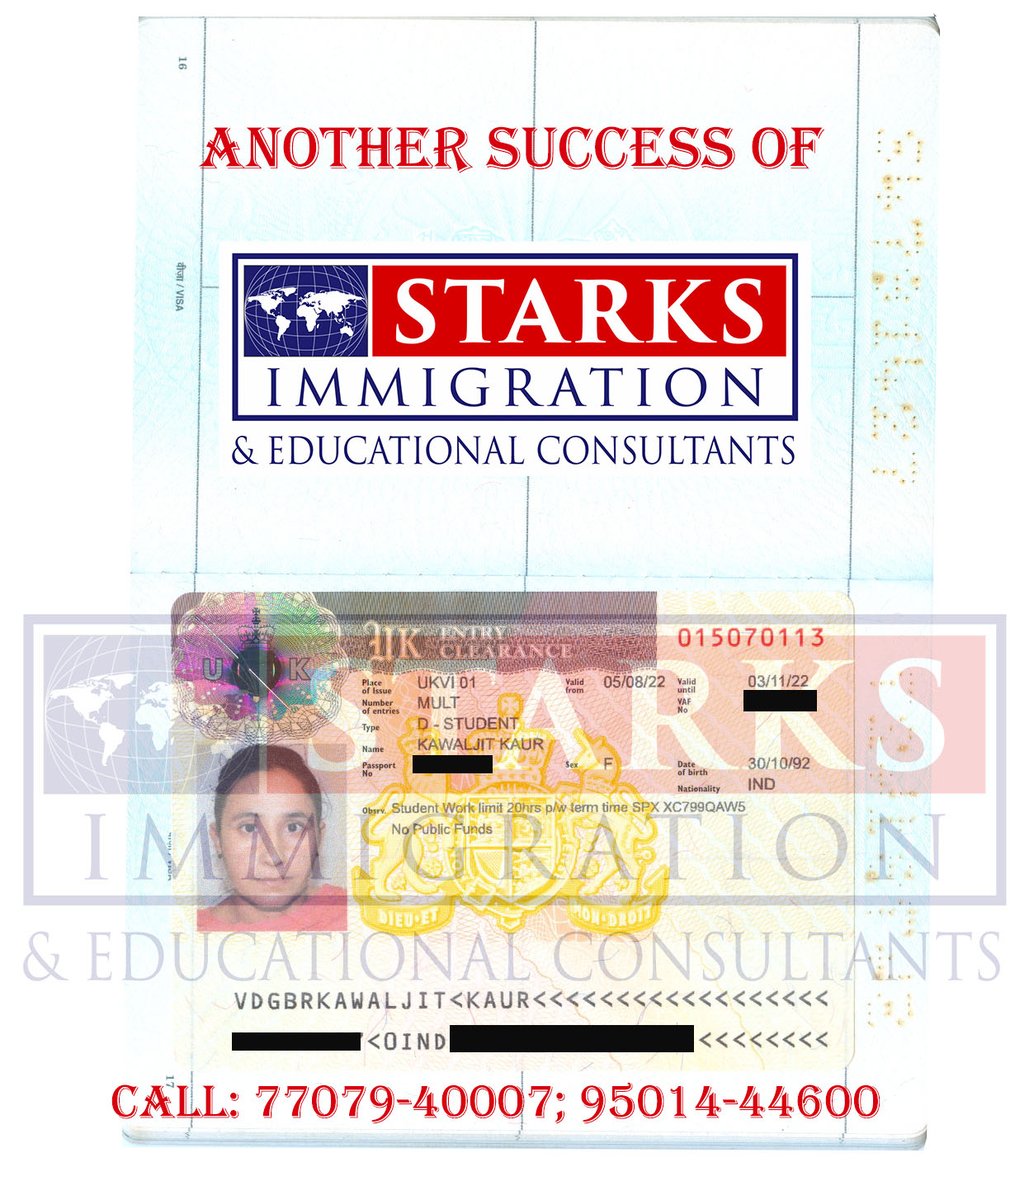 👉Apply study visa 👉UK
📣Congrats Kawaljit Kaur📣 for receiving UK Study Visa
Apply your UK study visa with Starks Immigration
☑Spouse can accompany
☑Gap Acceptable
☑100% success
#immigrationsonsultant #canadastudyvisa
#australiastudyvisa #ukstudyvisa 
#starksimmigrationasr